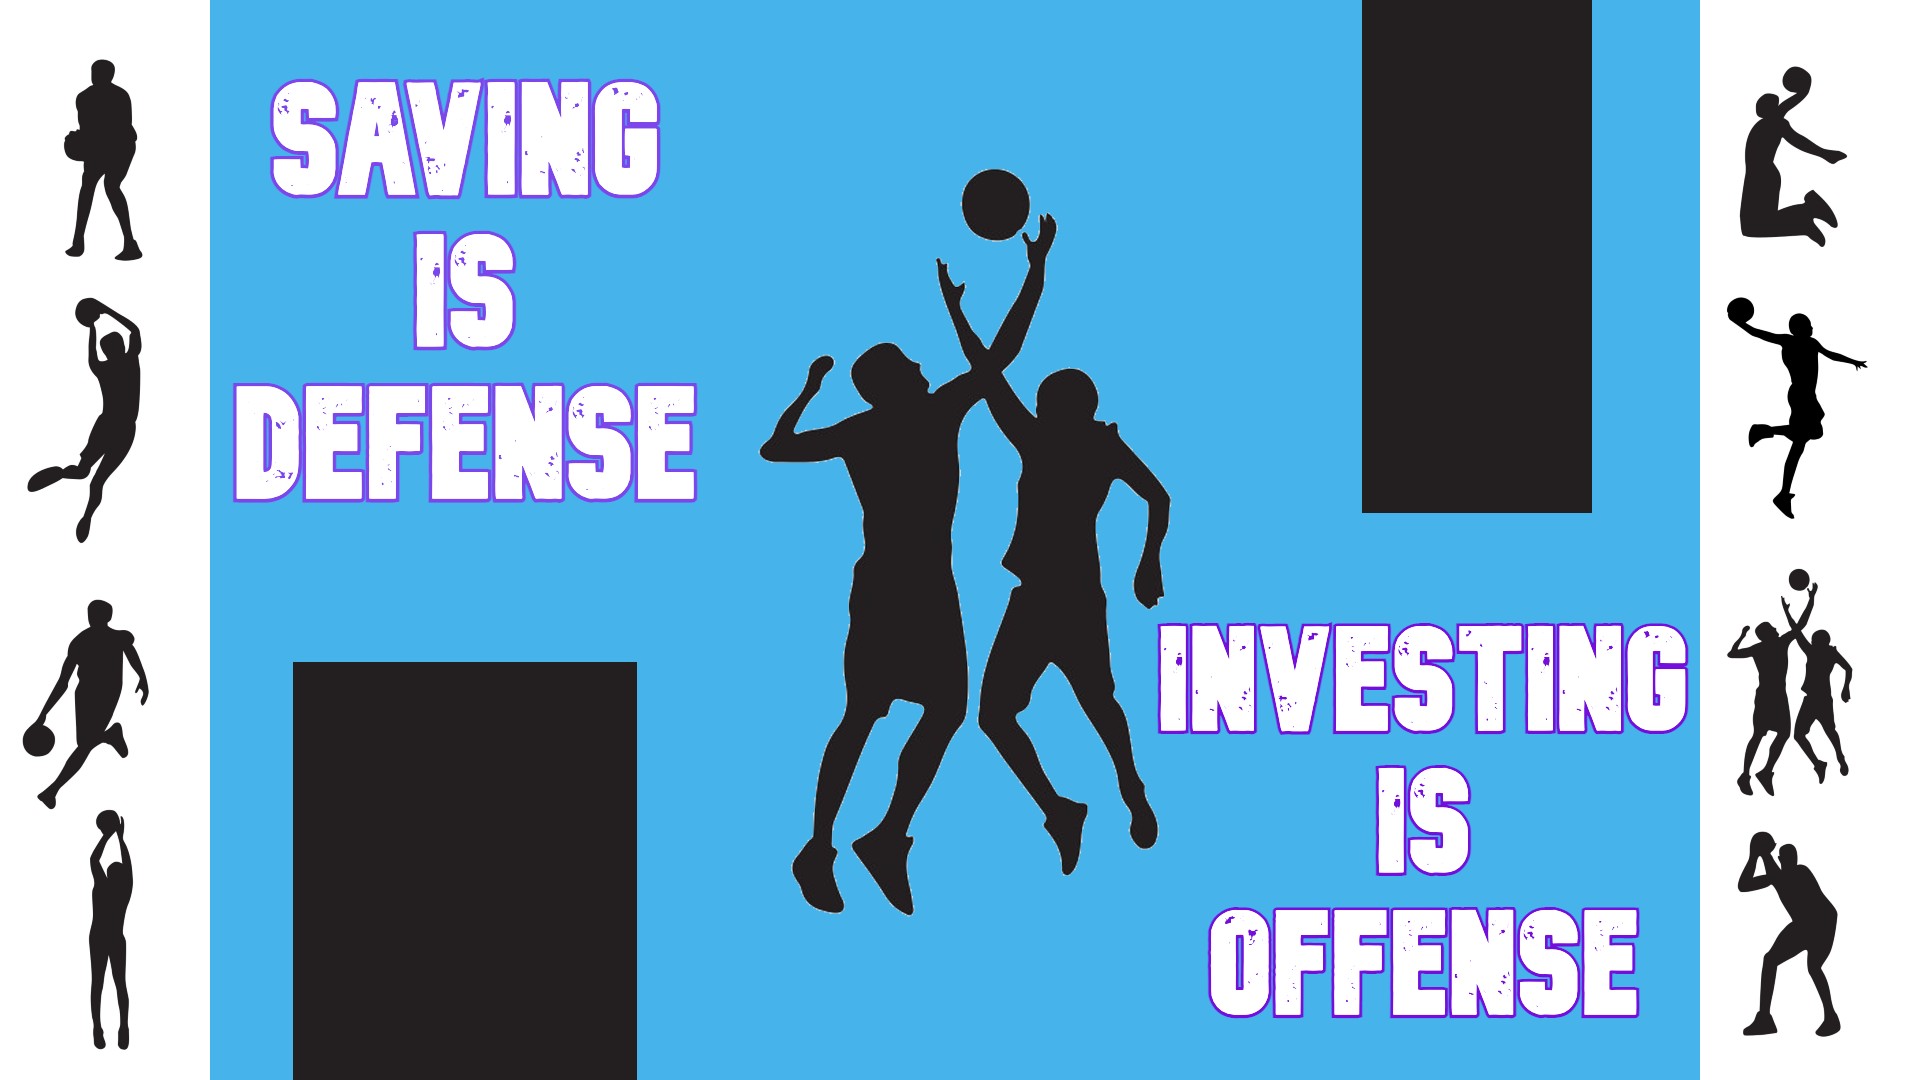 Saving is Defense: Investing is Offense